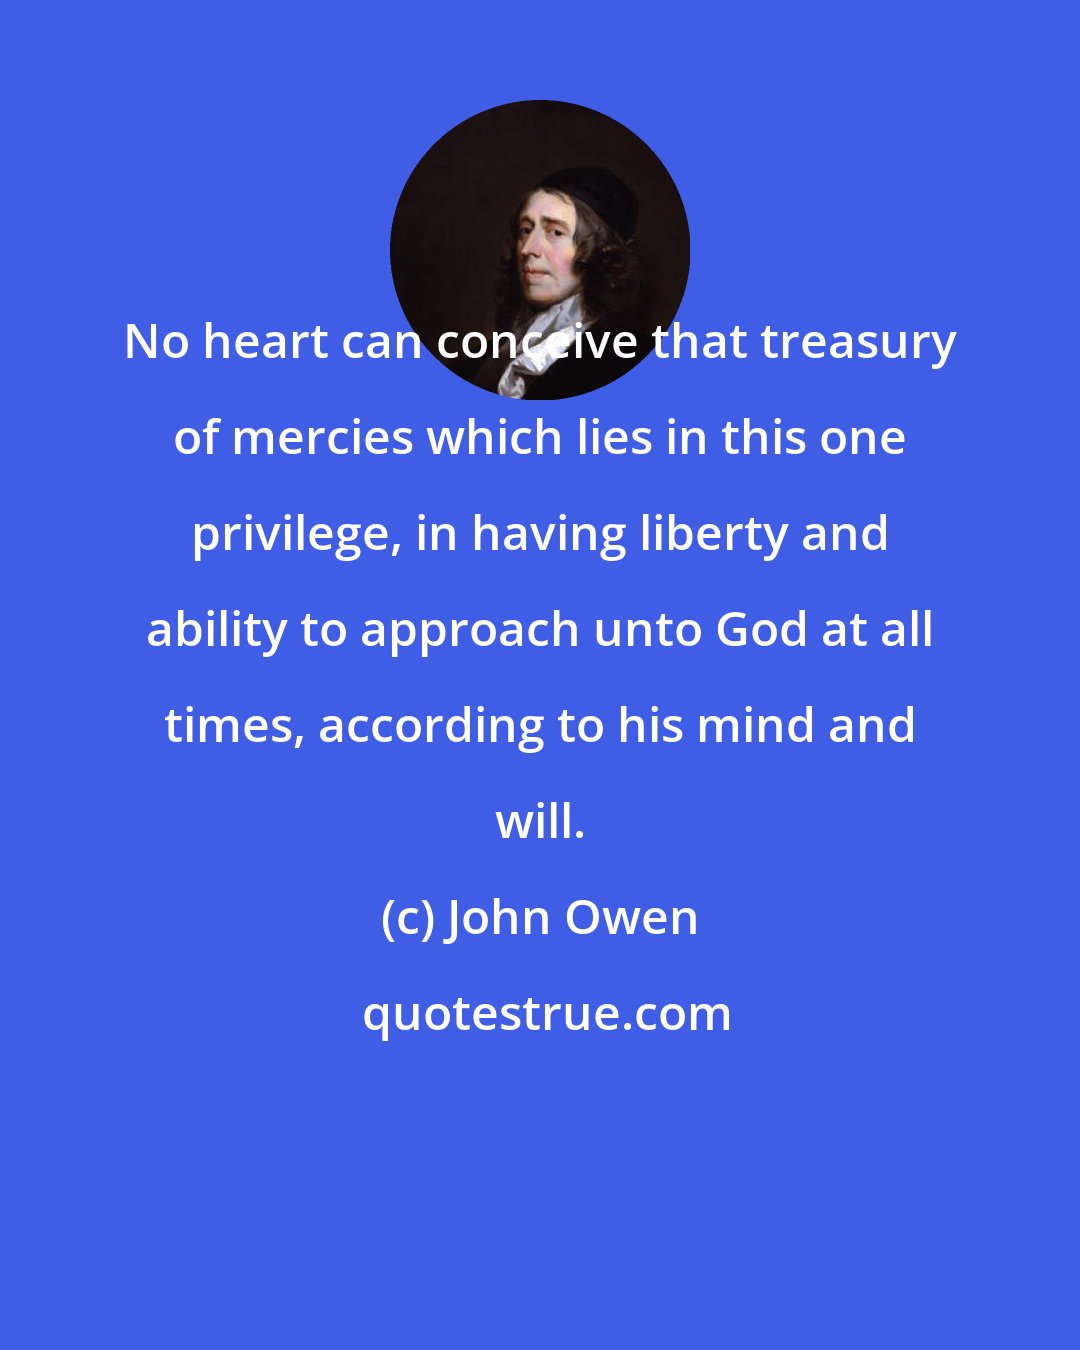 John Owen: No heart can conceive that treasury of mercies which lies in this one privilege, in having liberty and ability to approach unto God at all times, according to his mind and will.